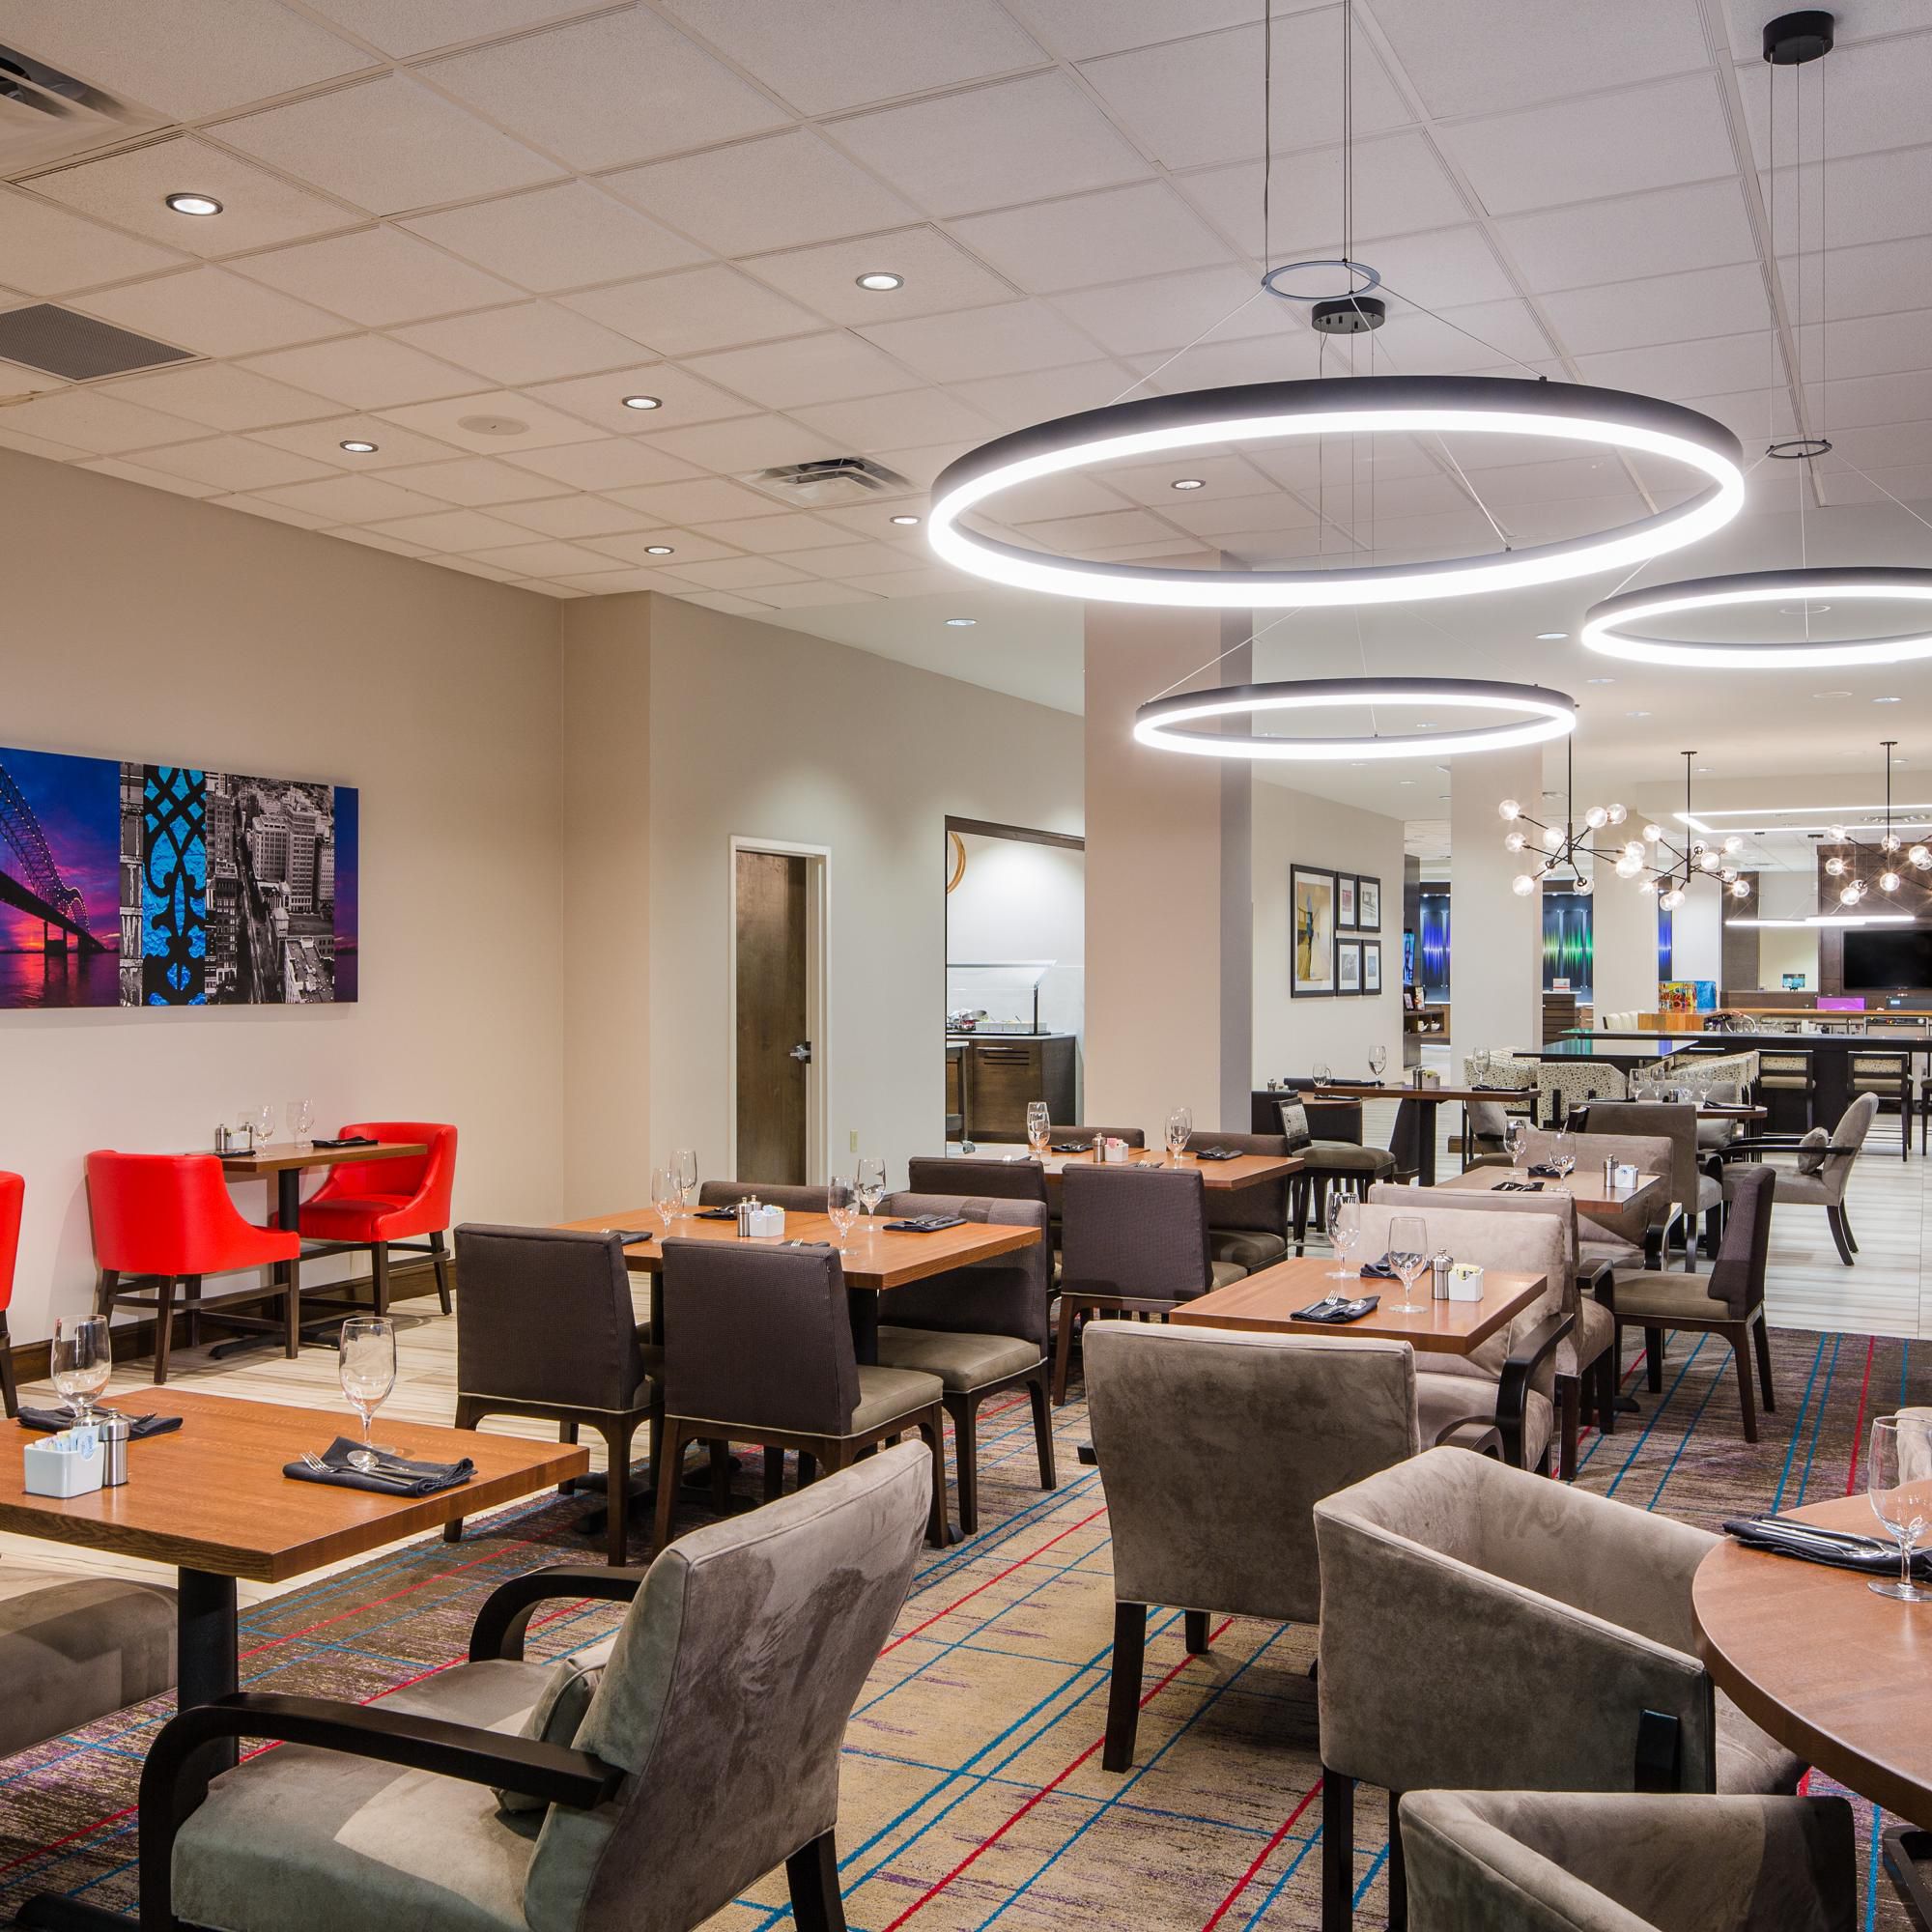 This Memphis hotel offers breakfast, lunch, and dinner daily